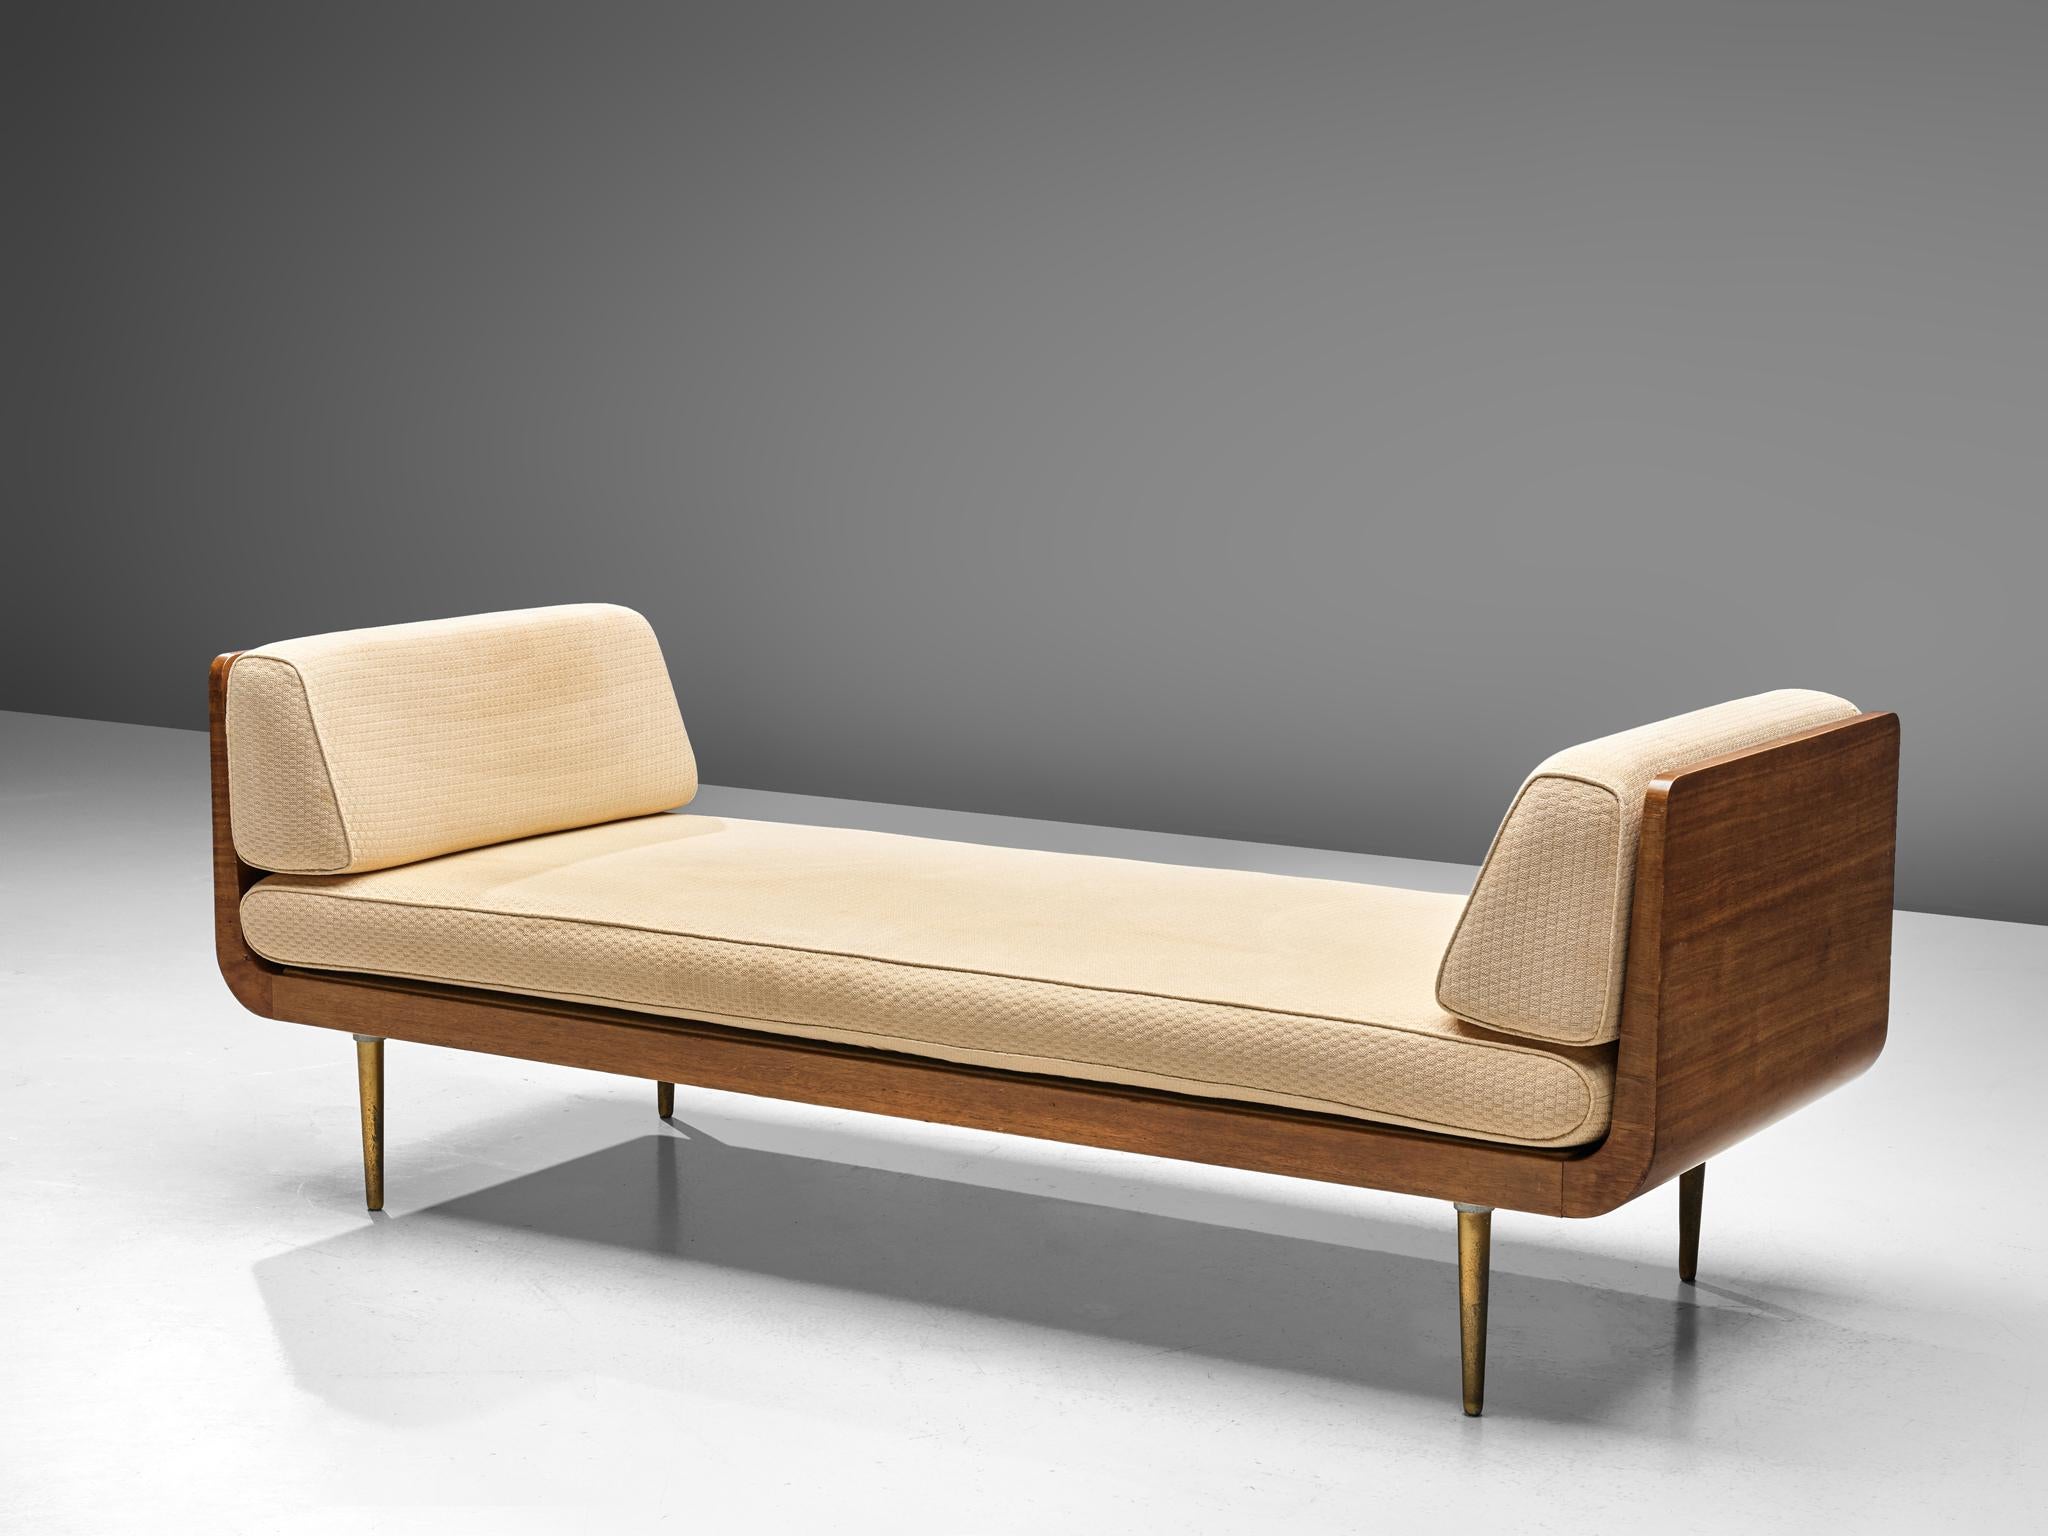 Edward Wormley for Dunbar, daybed, mahogany, fabric, metal, United States, 1950s.

A daybed designed by Edward Wormley for Dunbar in mahogany. The sculpted frame shows beautiful lines and forms up at its end. The two cushions as well as the mattress